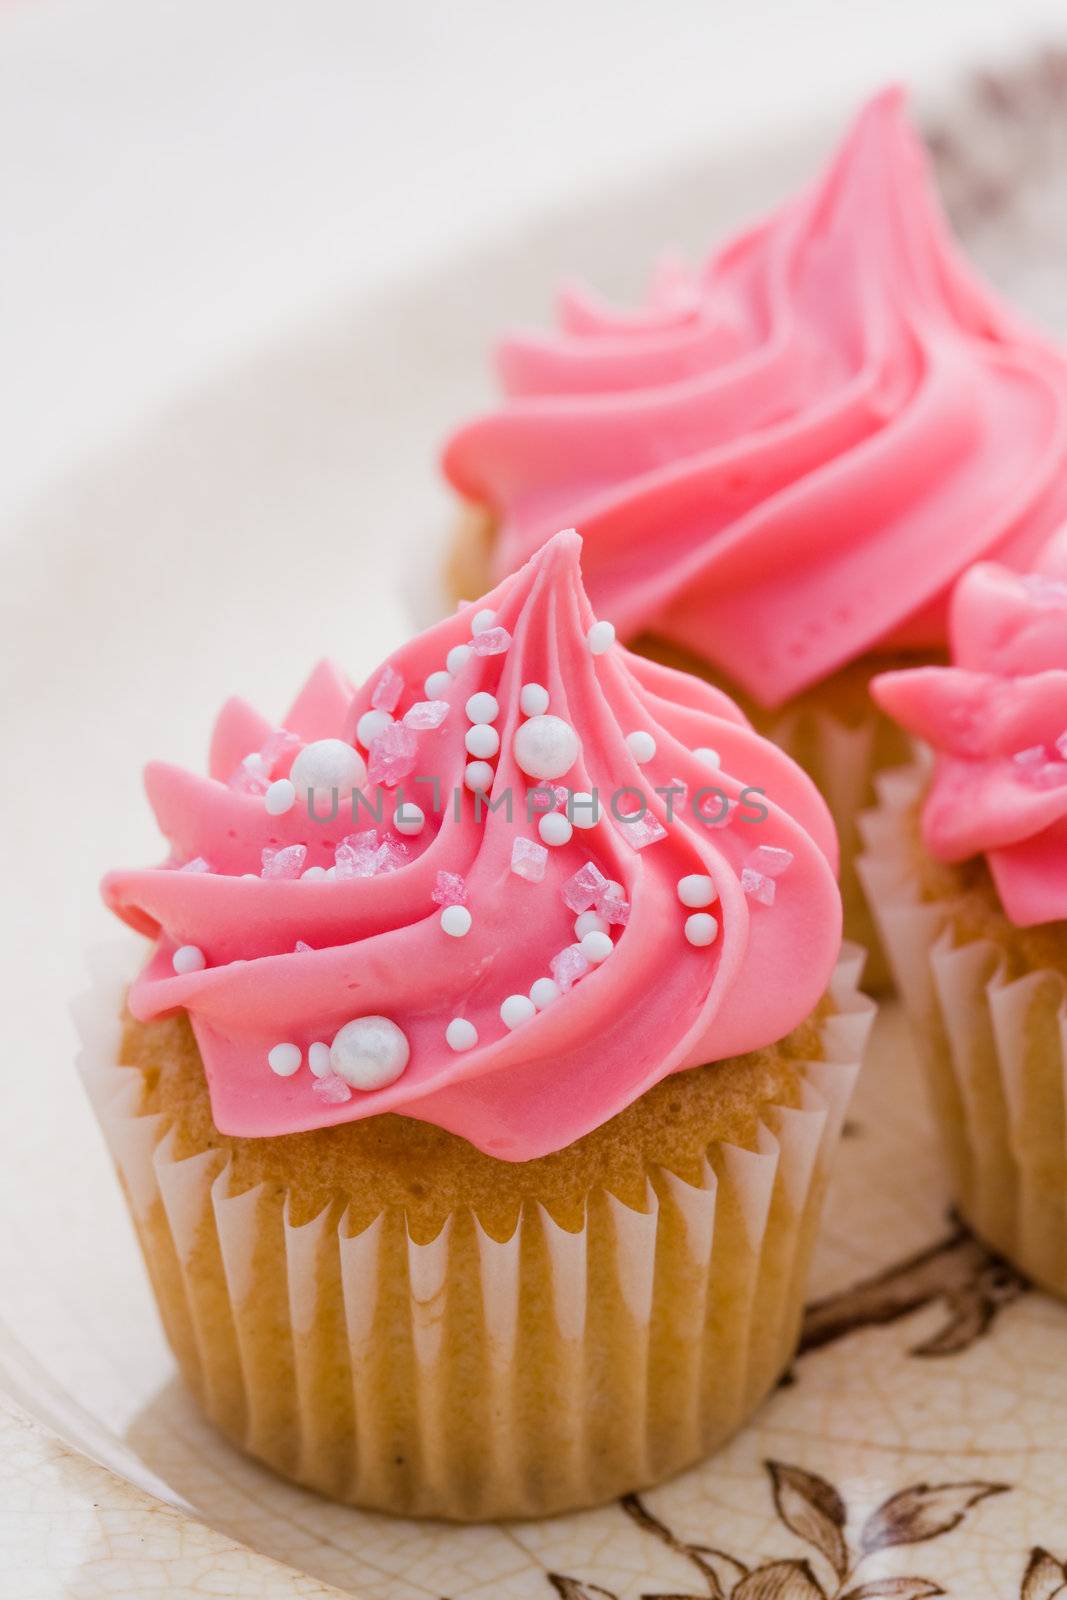 Cupcakes decorated with pink frosting and sprinkles